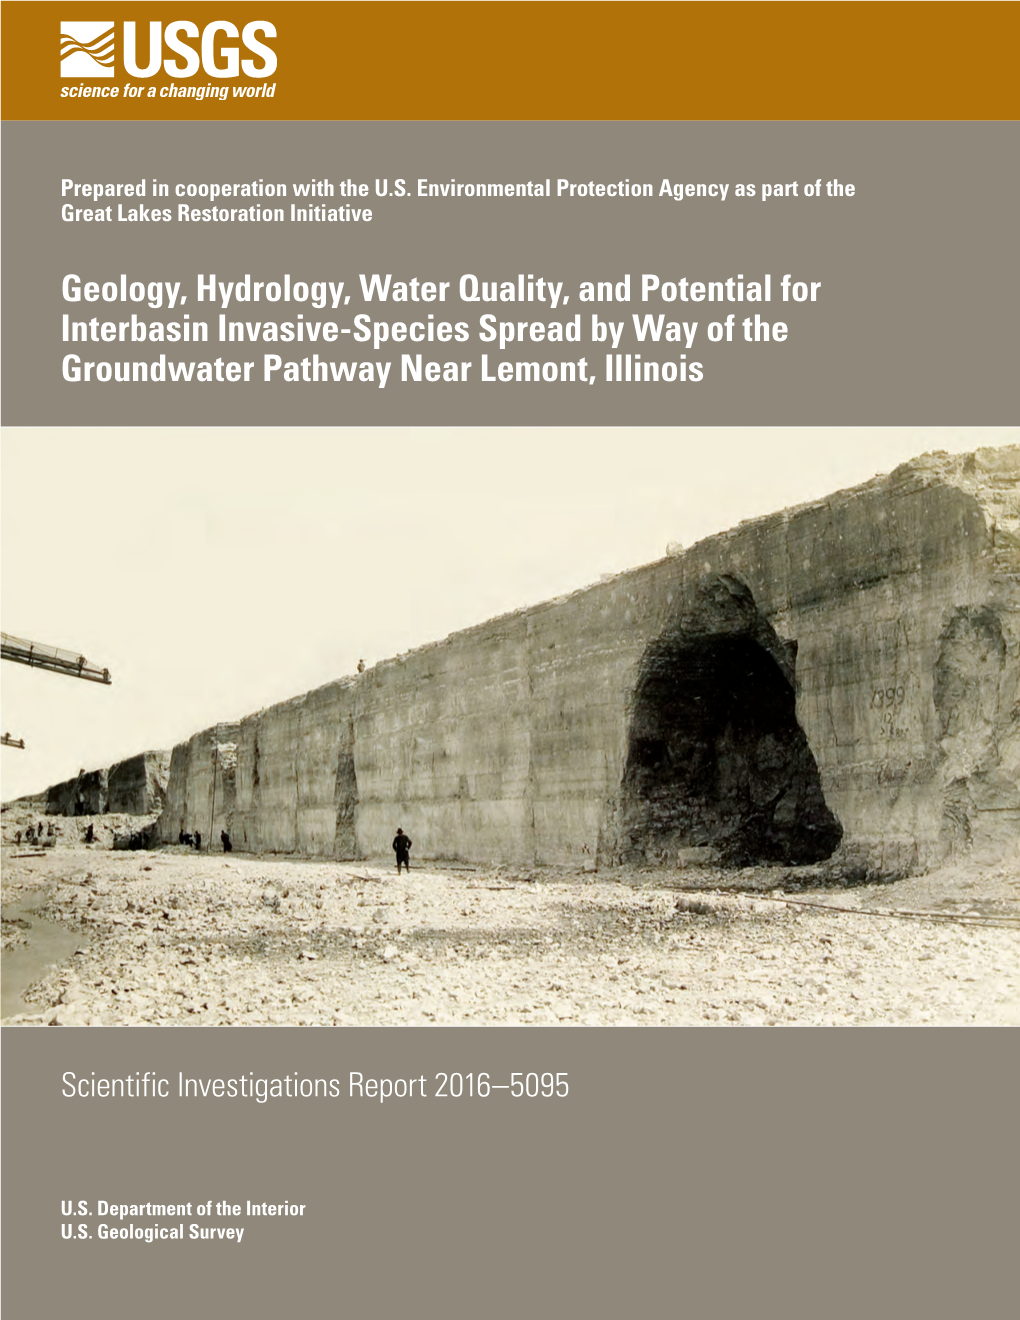 Geology, Hydrology, Water Quality, and Potential for Interbasin Invasive-Species Spread by Way of the Groundwater Pathway Near Lemont, Illinois